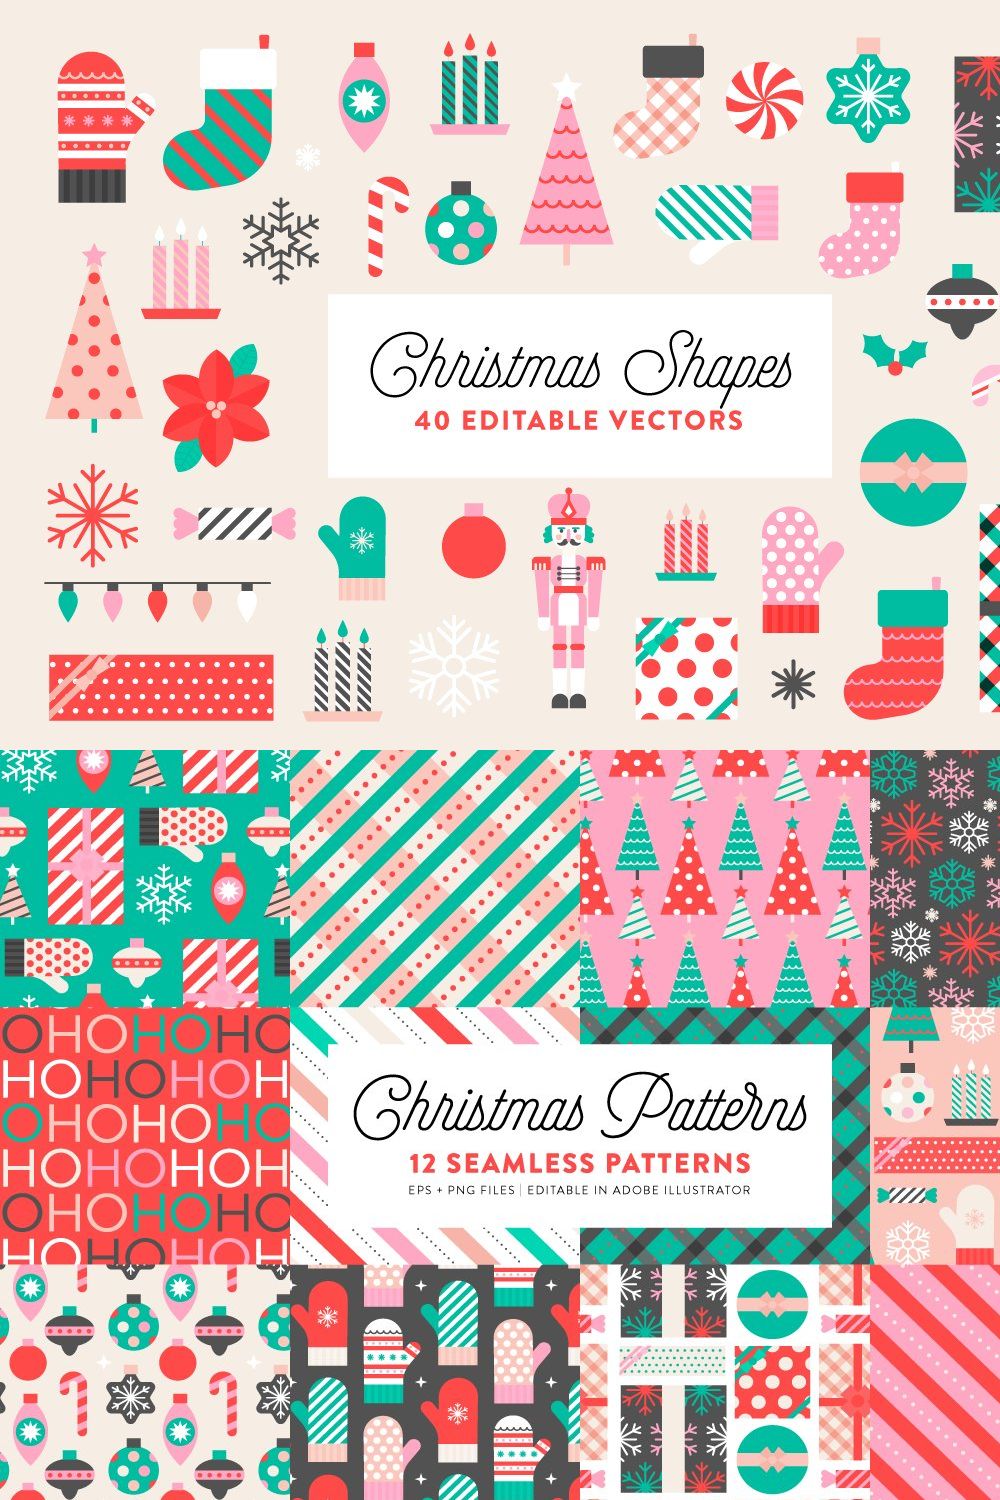 Christmas Shapes & Patterns pinterest preview image.